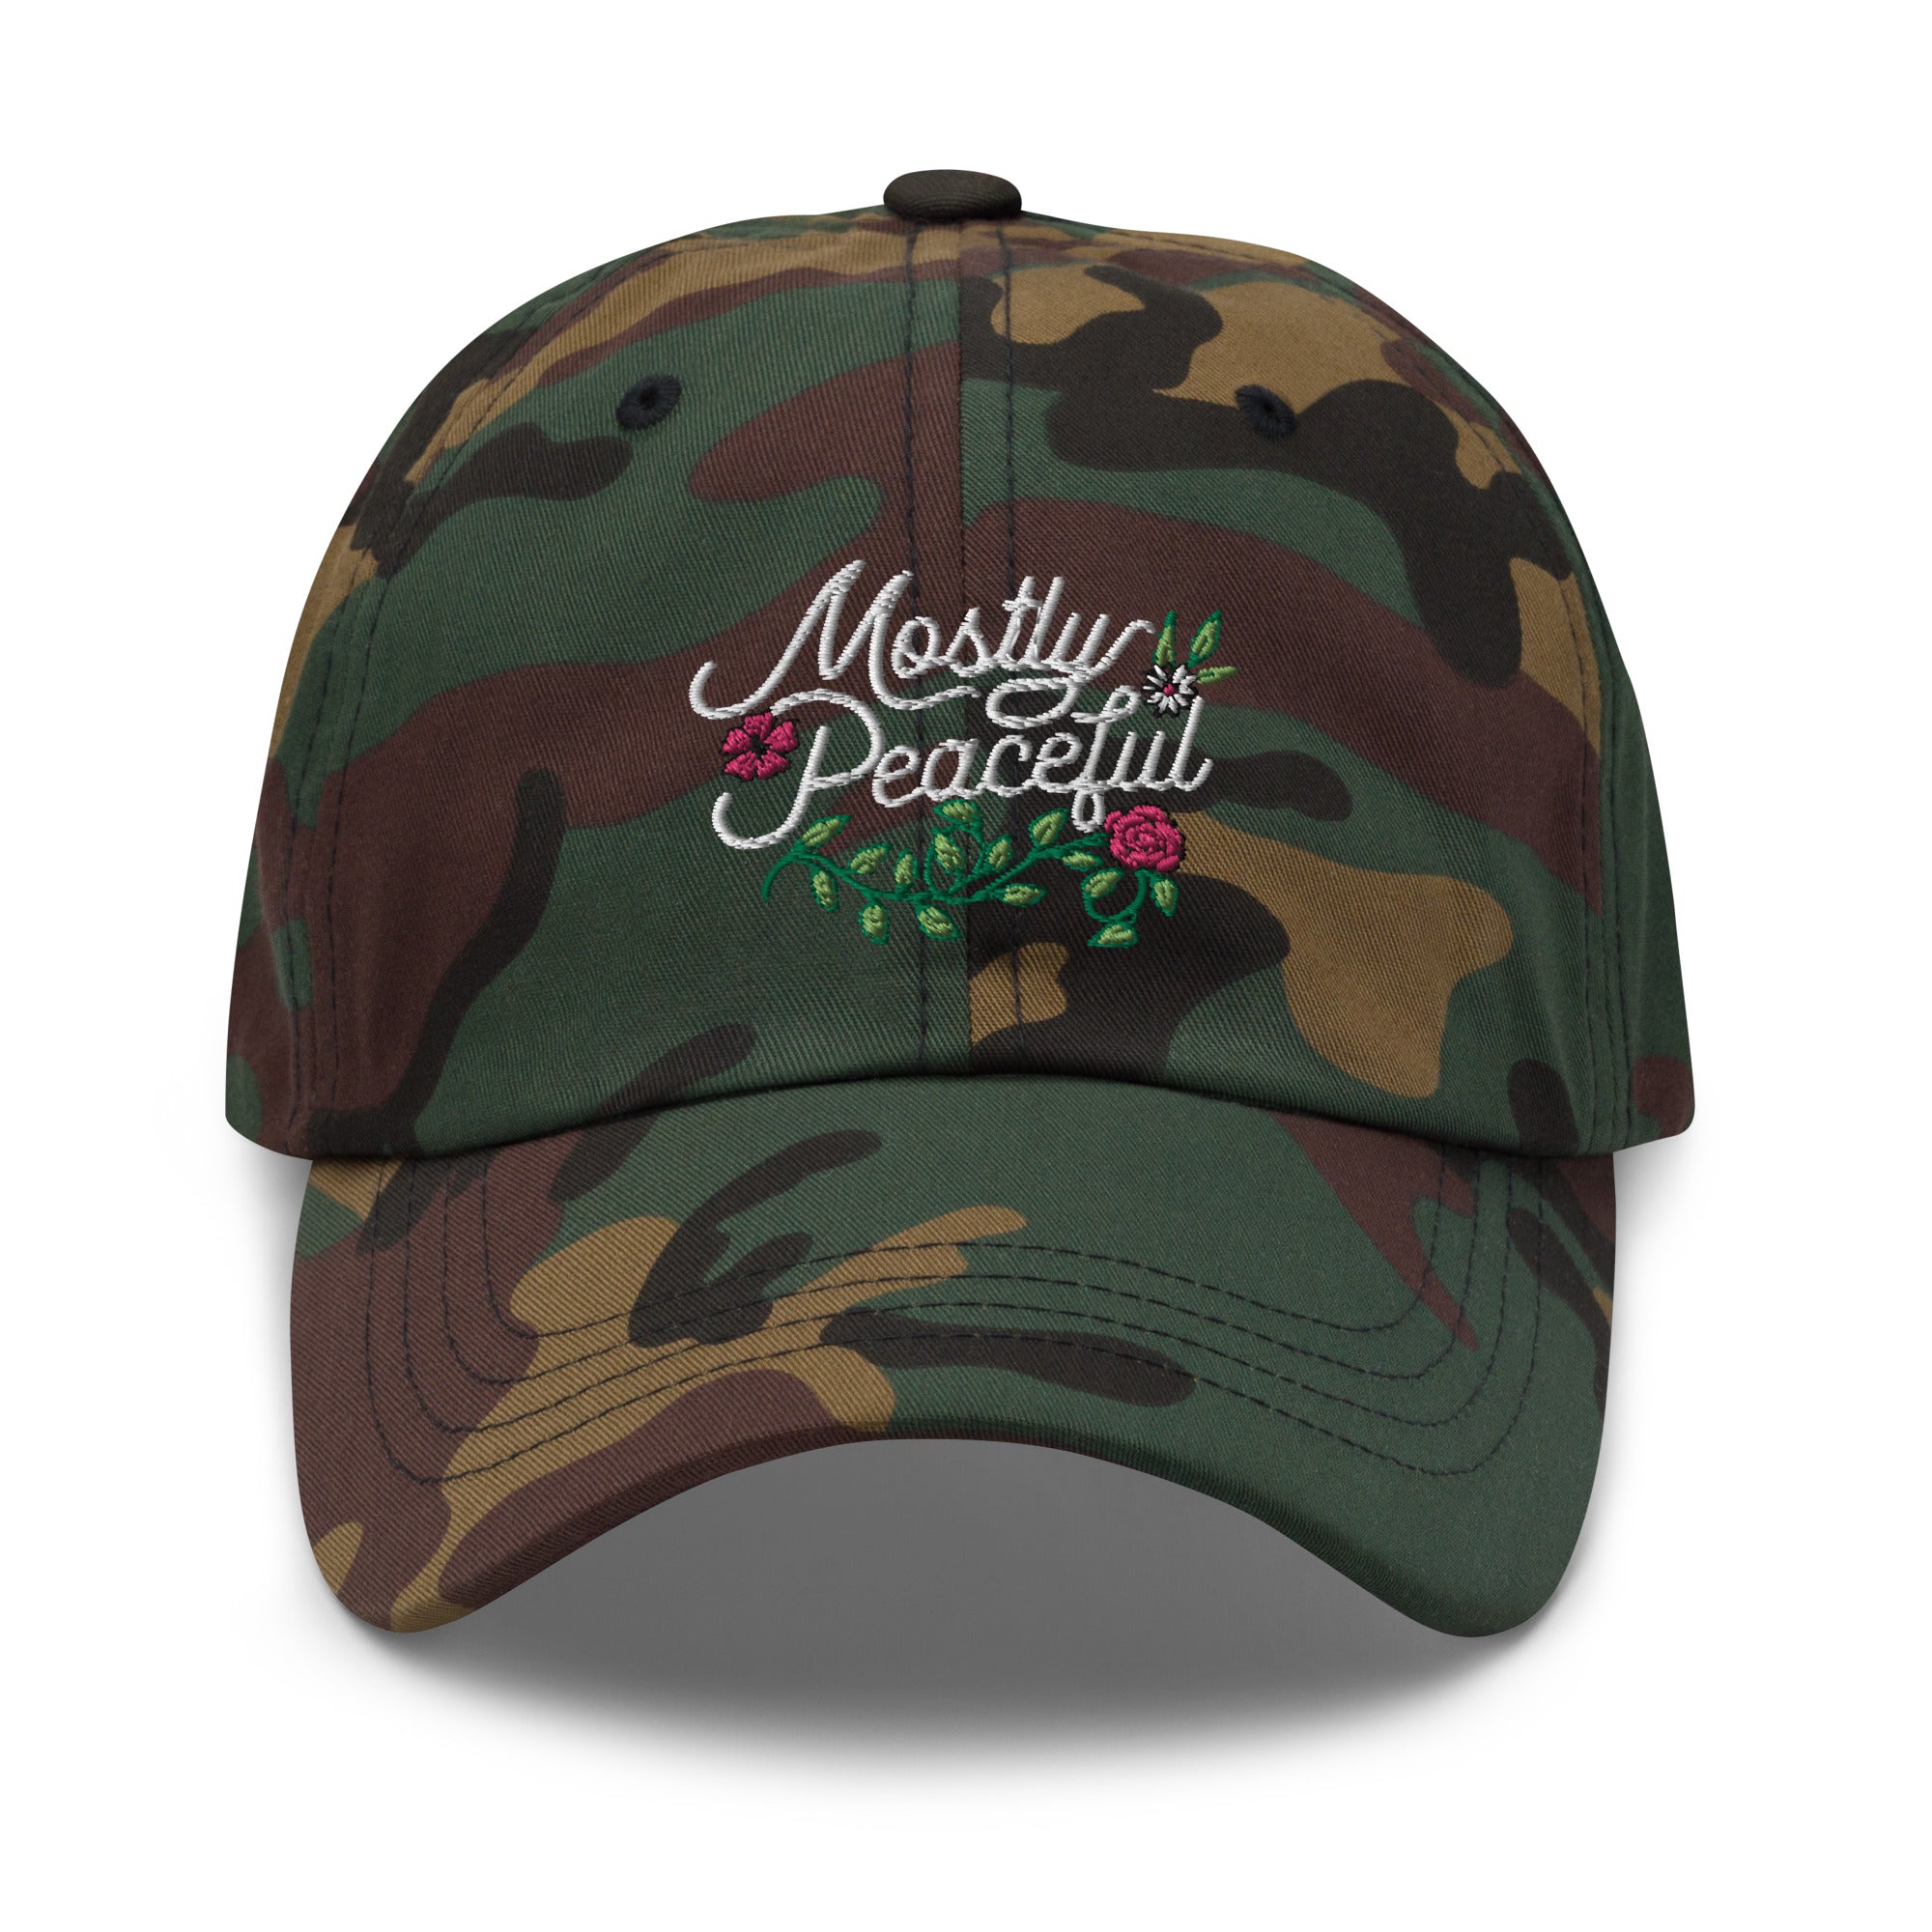 Mostly Peaceful Hat